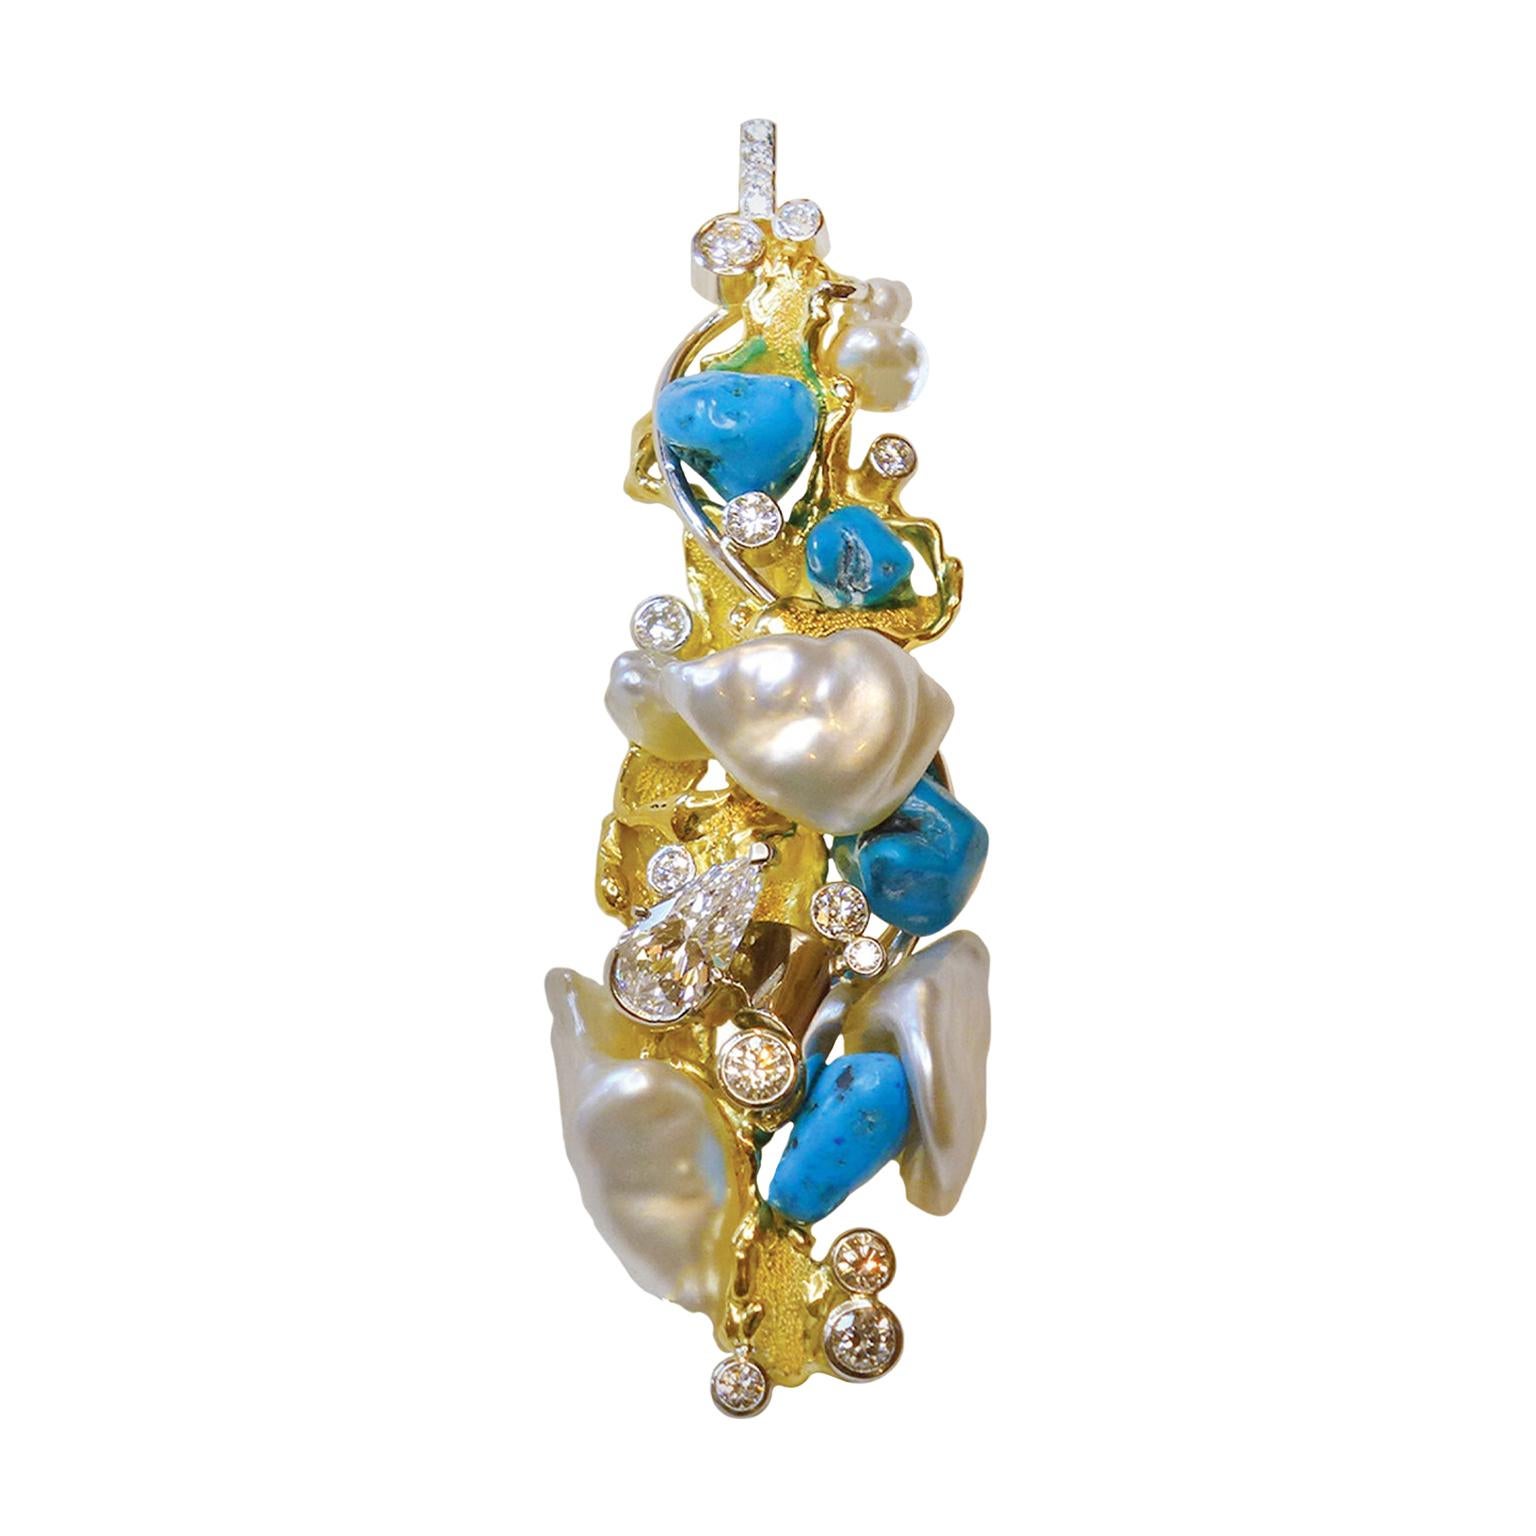 Paul Amey 18k Gold, Pearl, Turquoise and Diamond Pendant